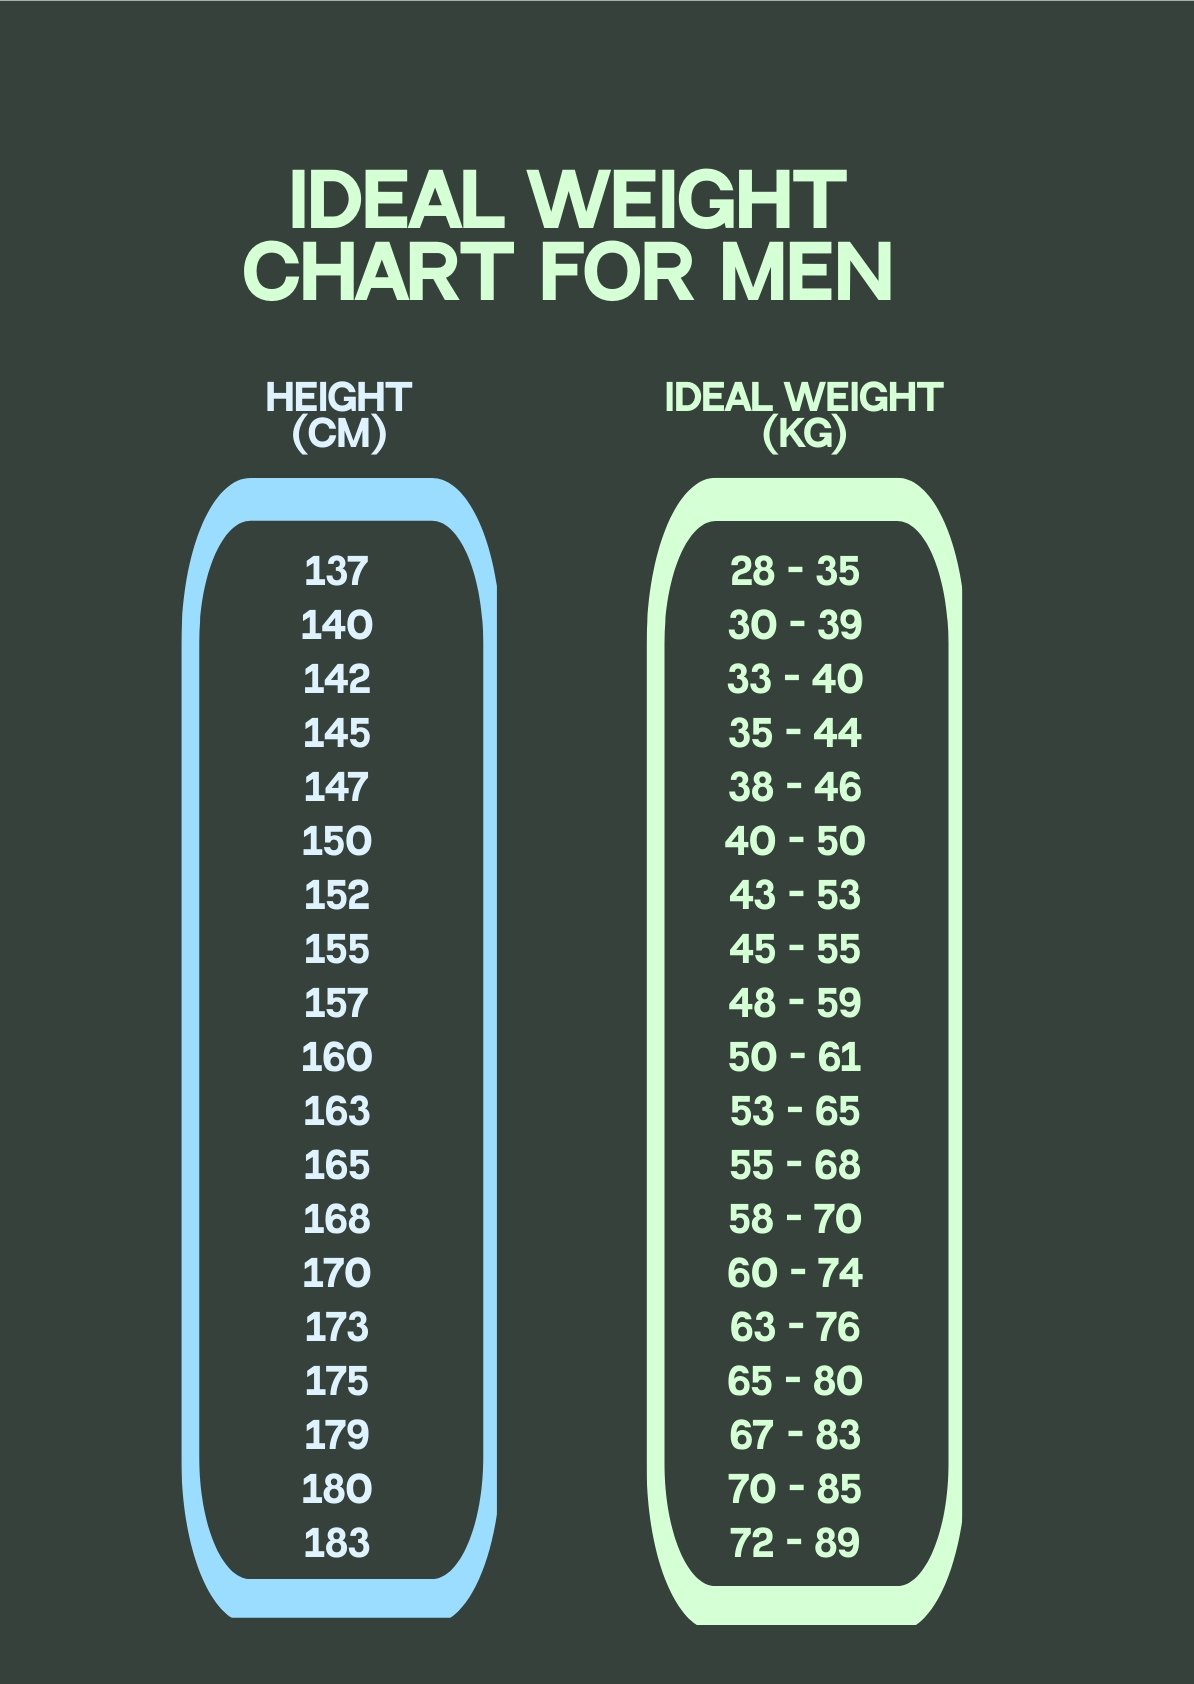 Free Ideal Weight Chart For Men in PDF, Illustrator